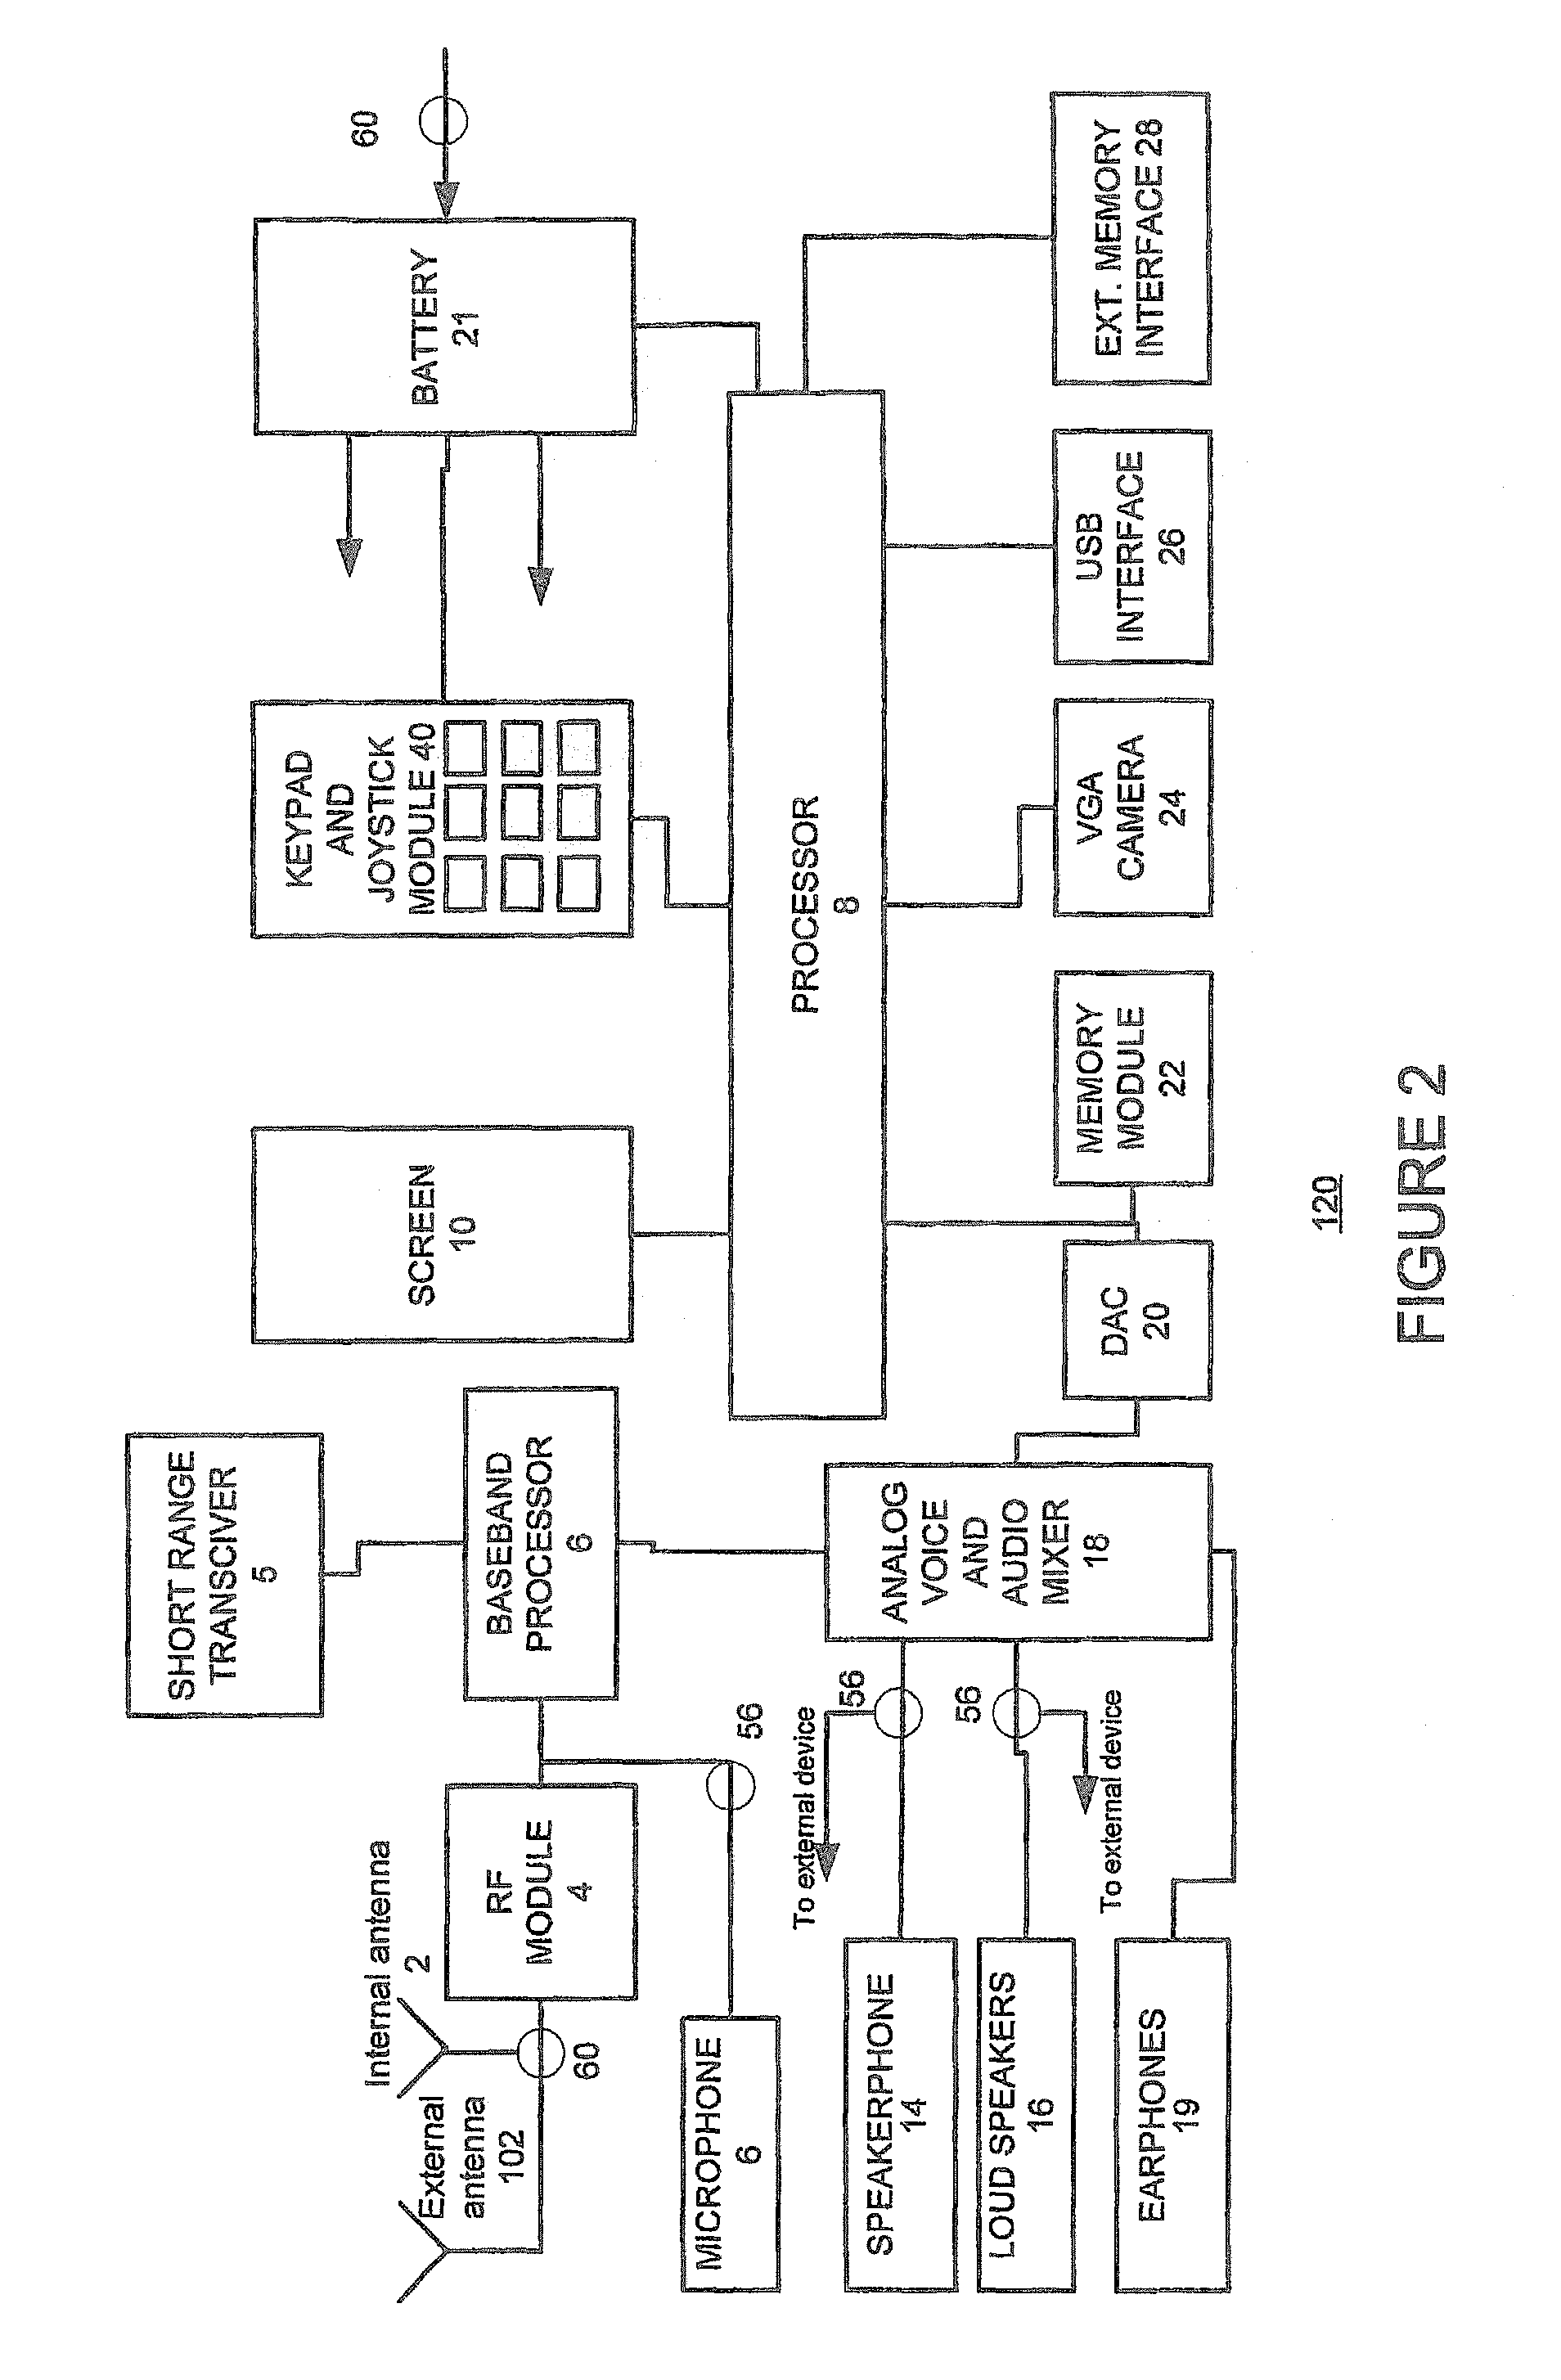 System and a method for physiological monitoring